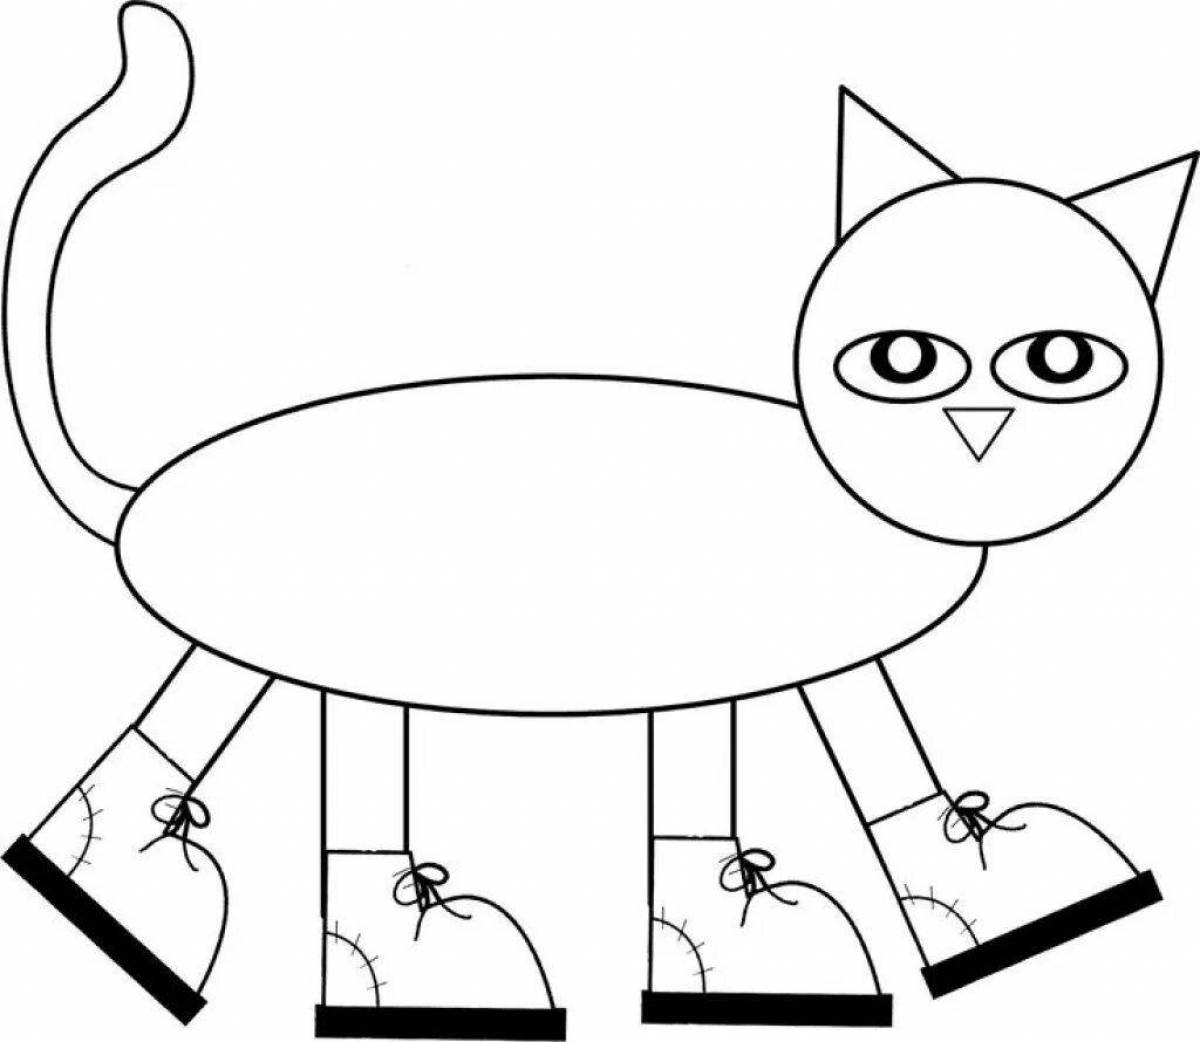 Cat Vizzy Cat's glowing coloring book